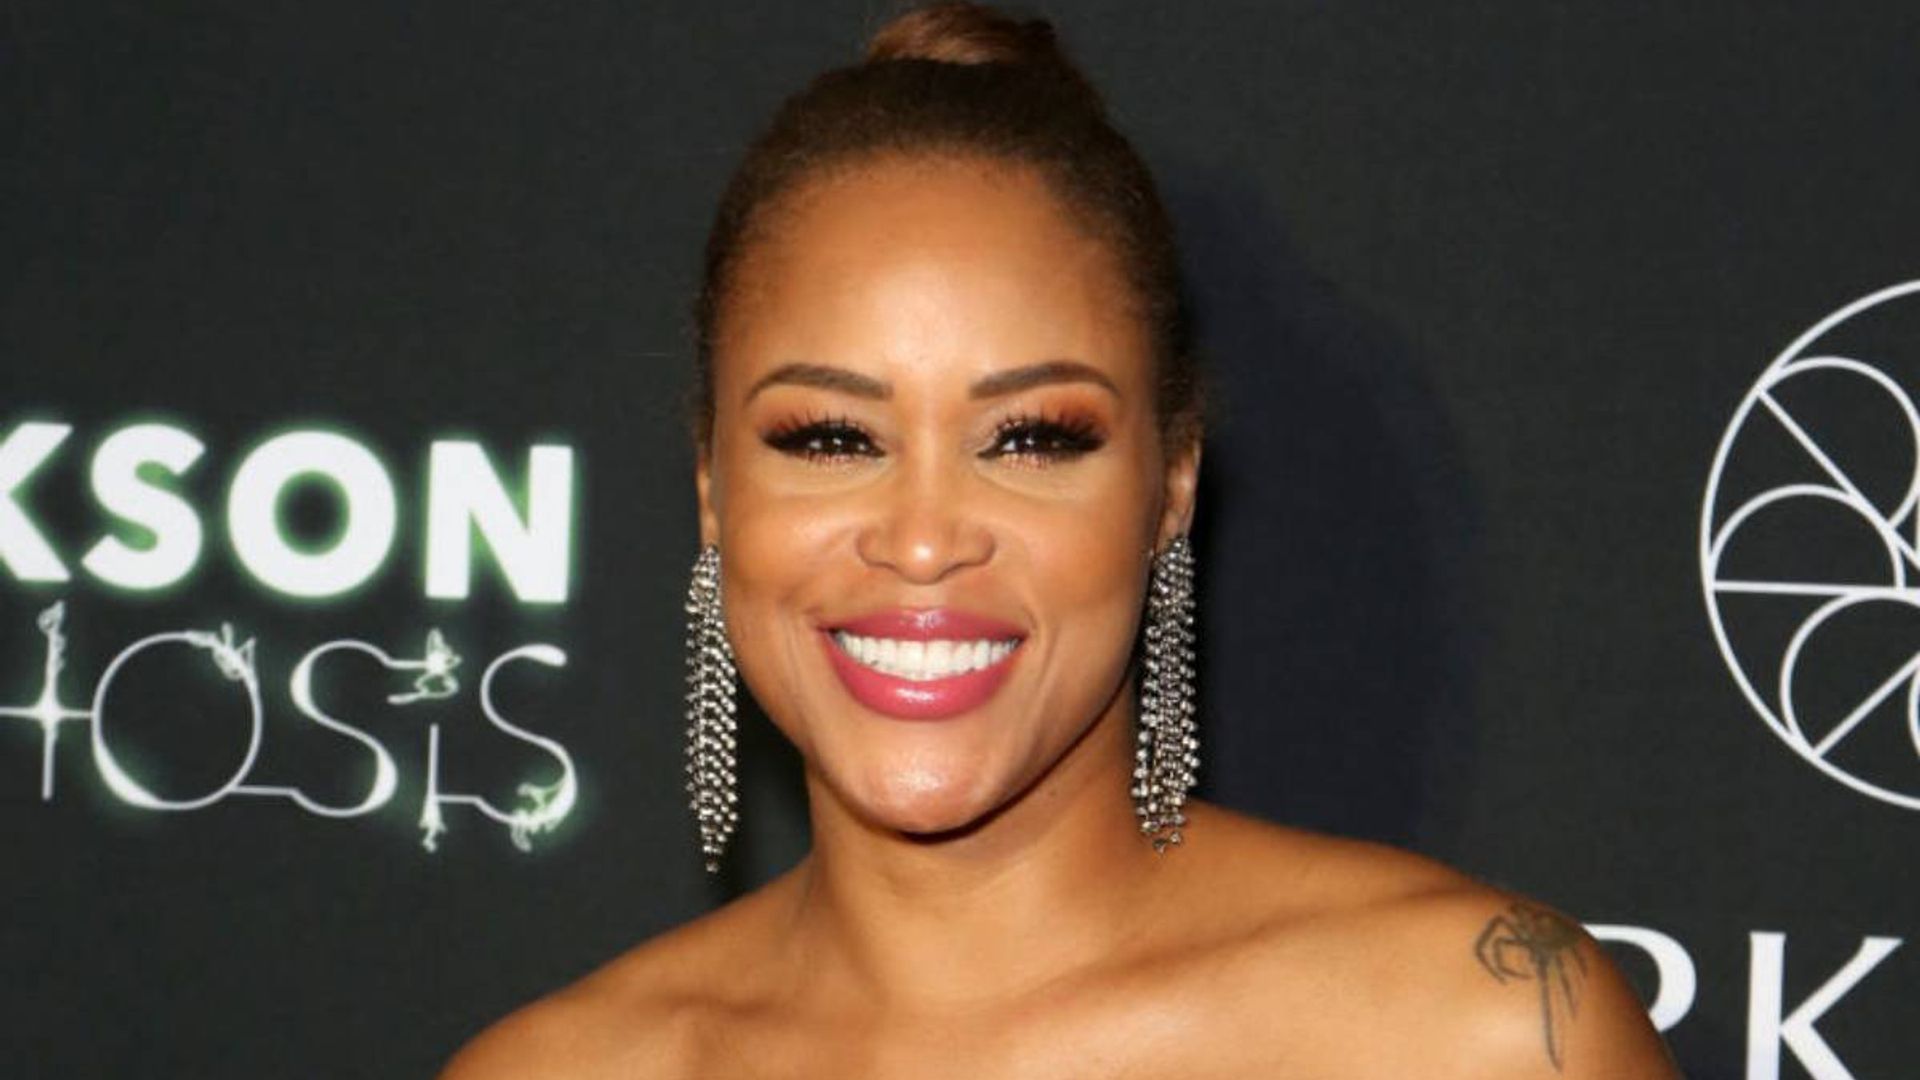 Pregnant rapper Eve looks radiant as she shares exciting baby update